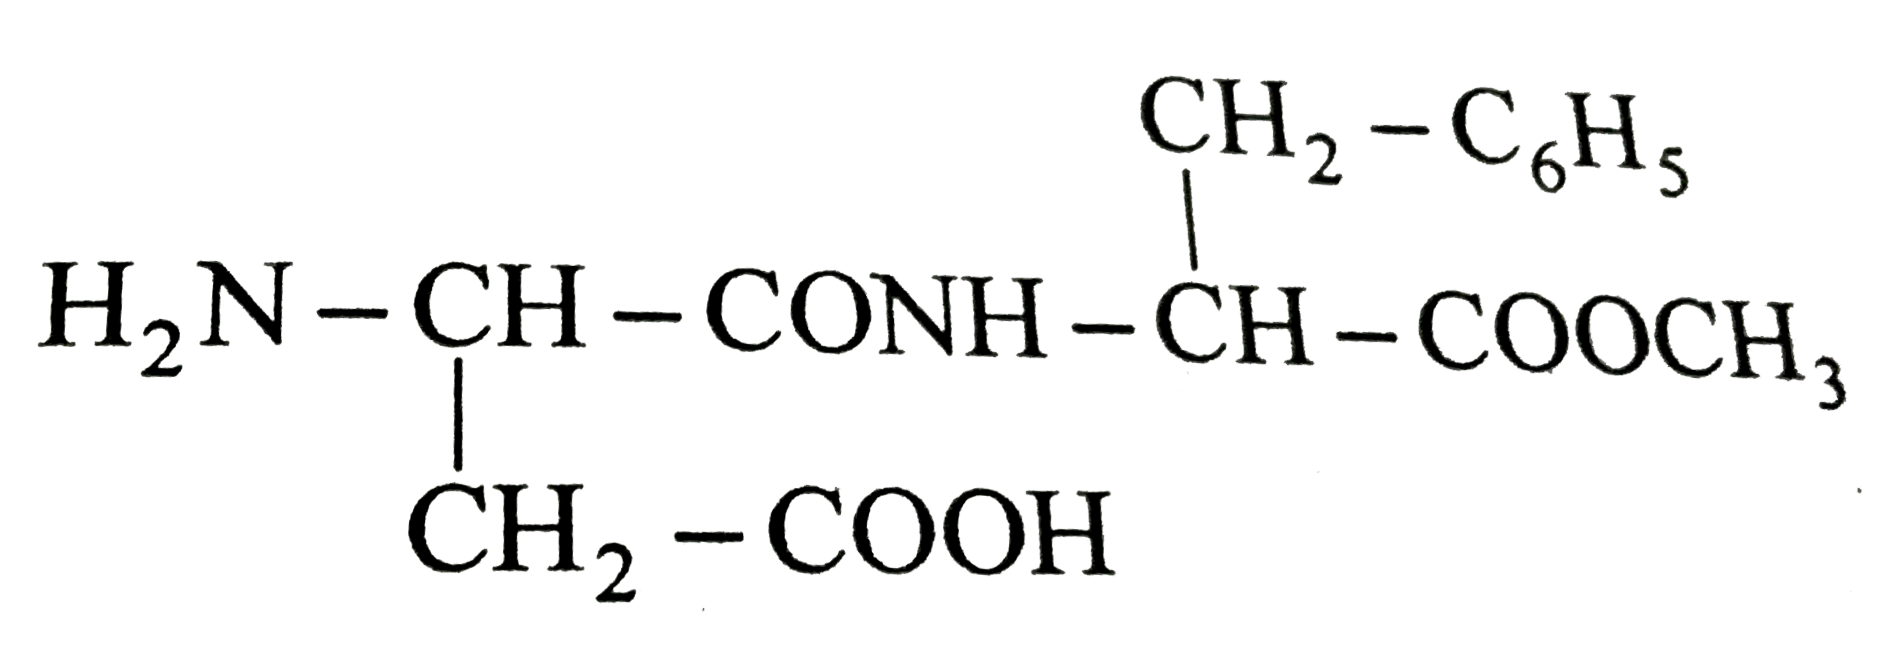 Aspartame, an artificial sweetener, is a peptide and has the following structure:   (i). Identify the four functional groups.   (ii). Write the zwitterionic structure.   (iii). Write the structures of the amino acids obtained from the hydrolysis of aspartame.   (iv). Which of the two amino acids is more hydrophobic?